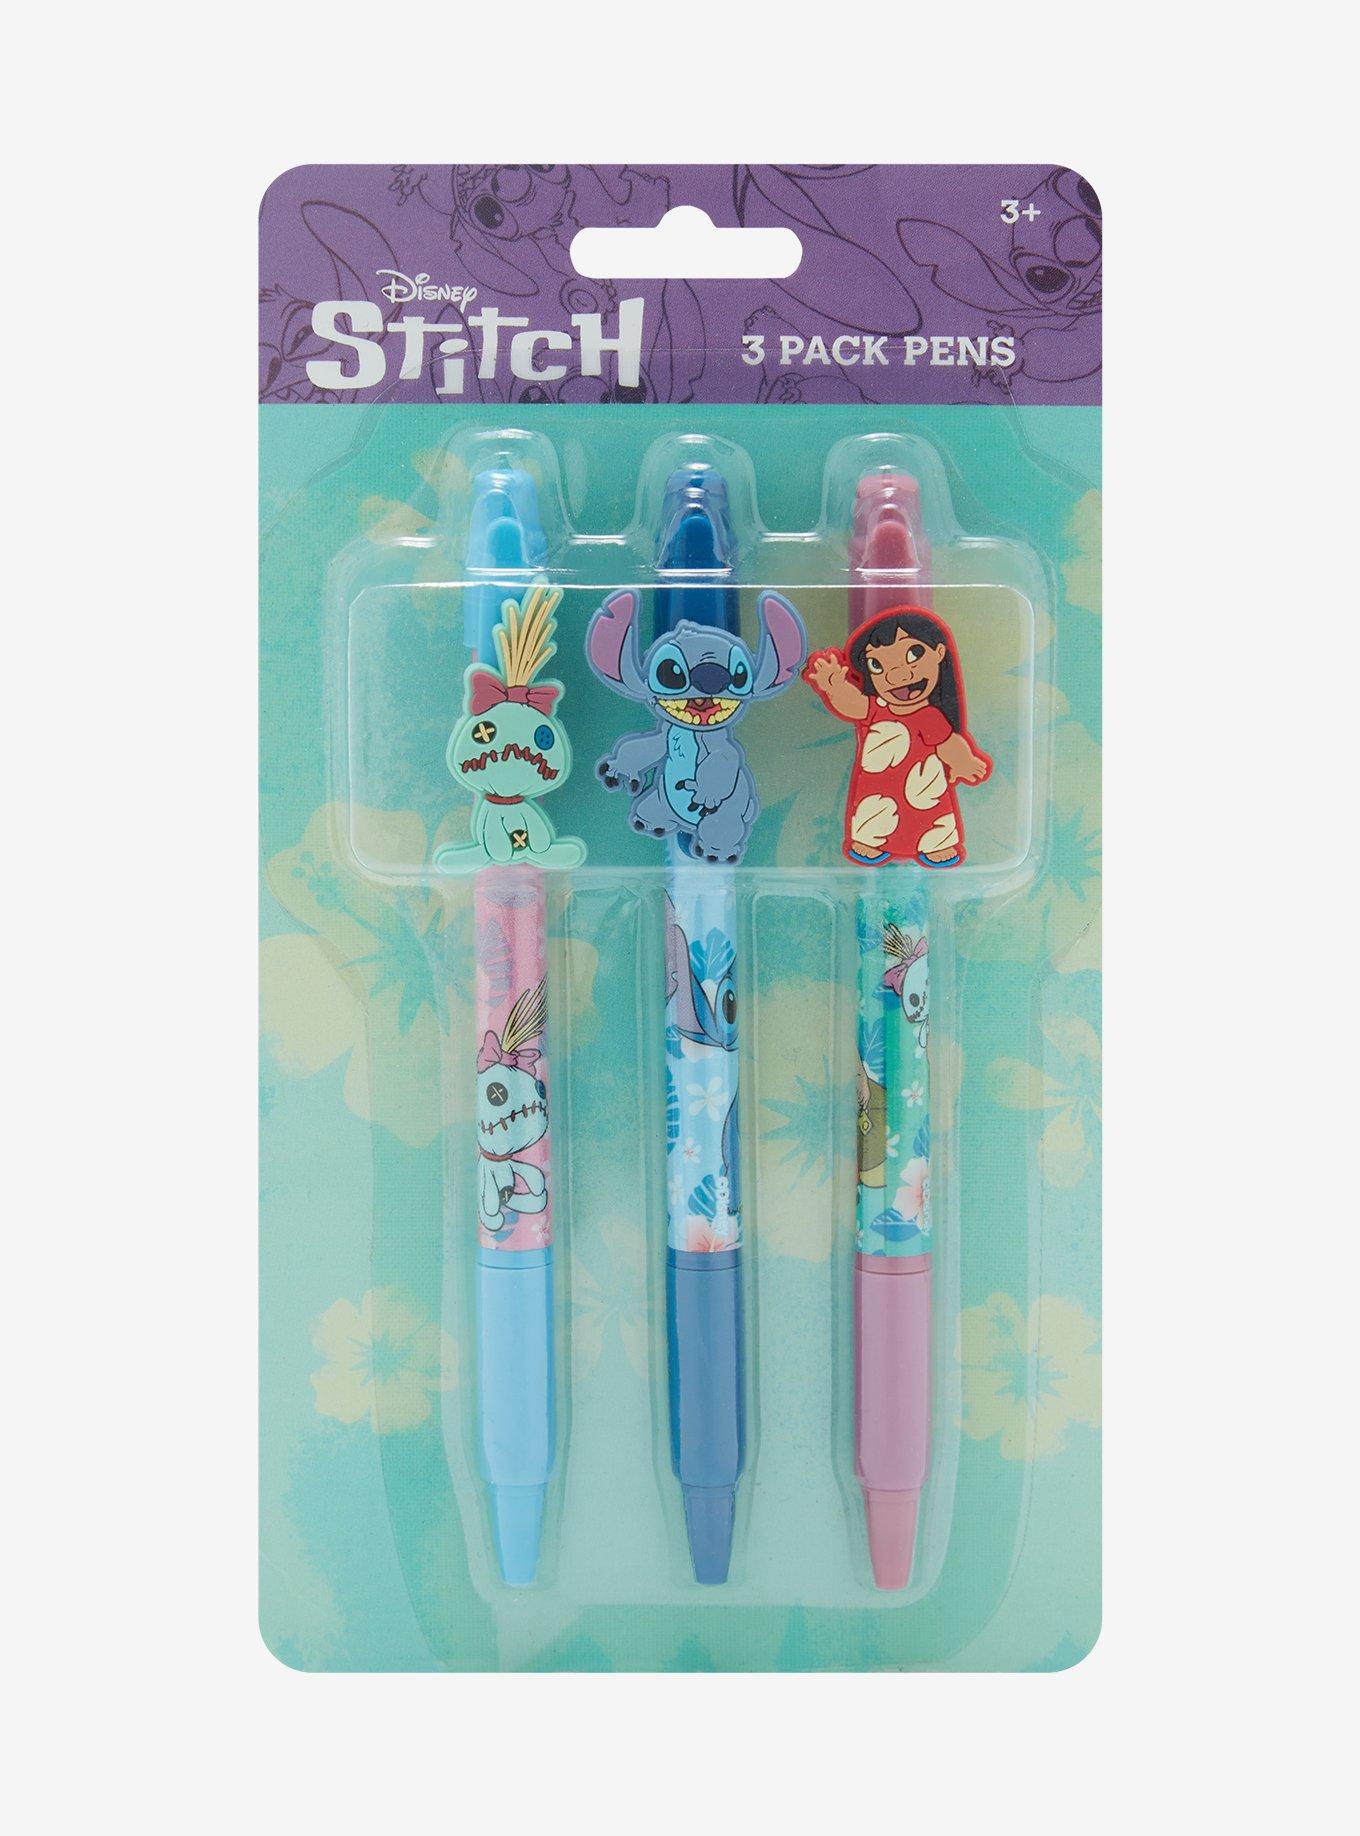 Disney Stitch Gel Pens for Kids Colored Pens with Storage Case 24 Pack, Size: One size, Blue